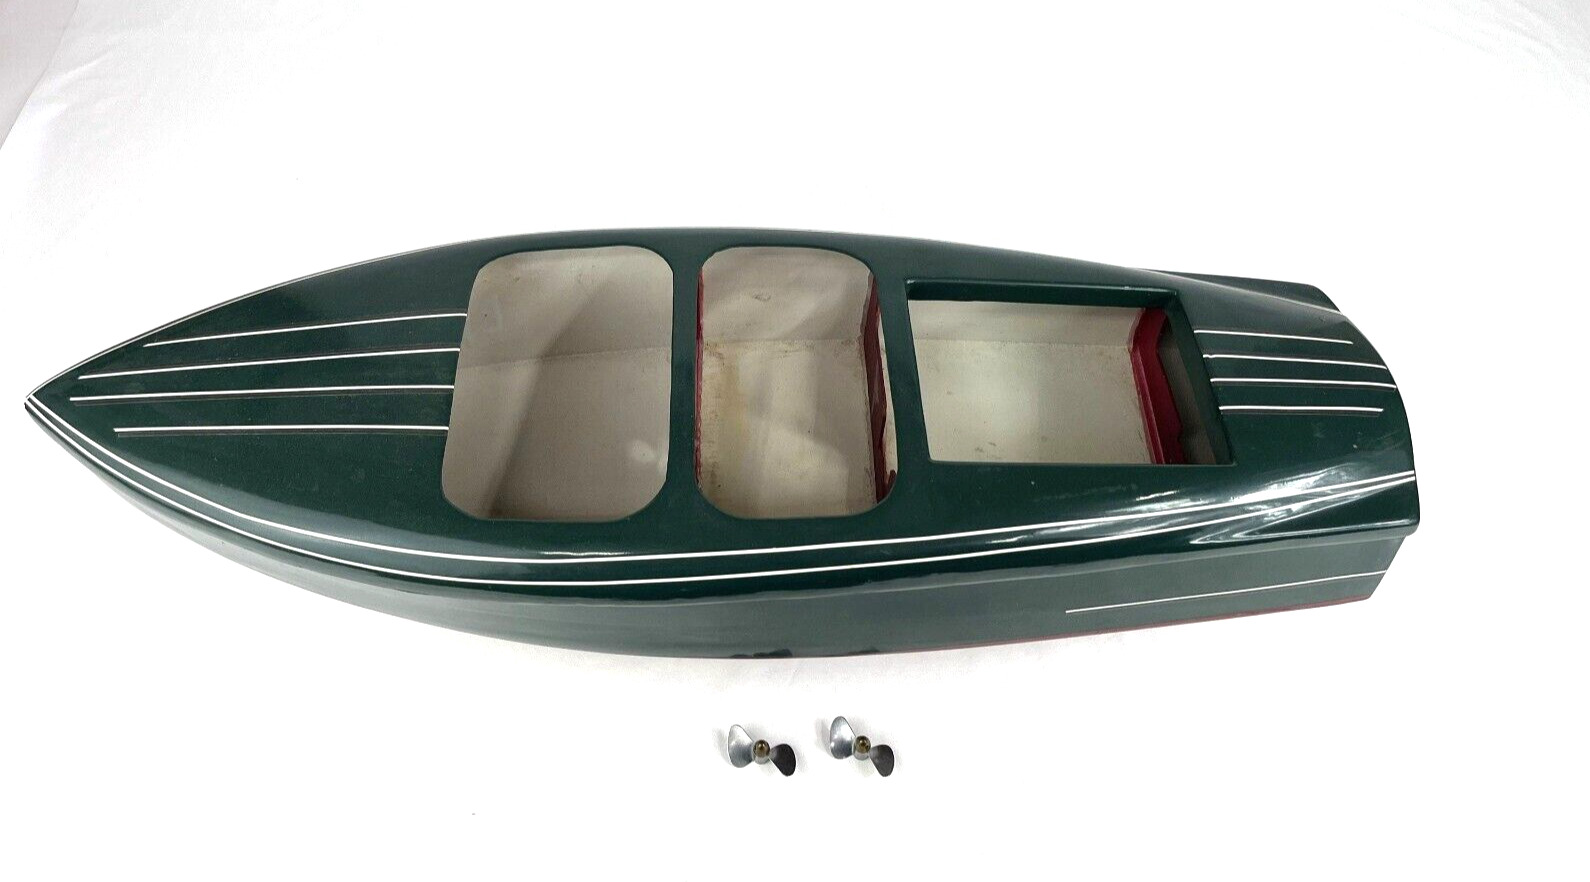 Chris Craft Model Boat Barrel Back Run- a-bout Finished Hull and Deck 28.5” long